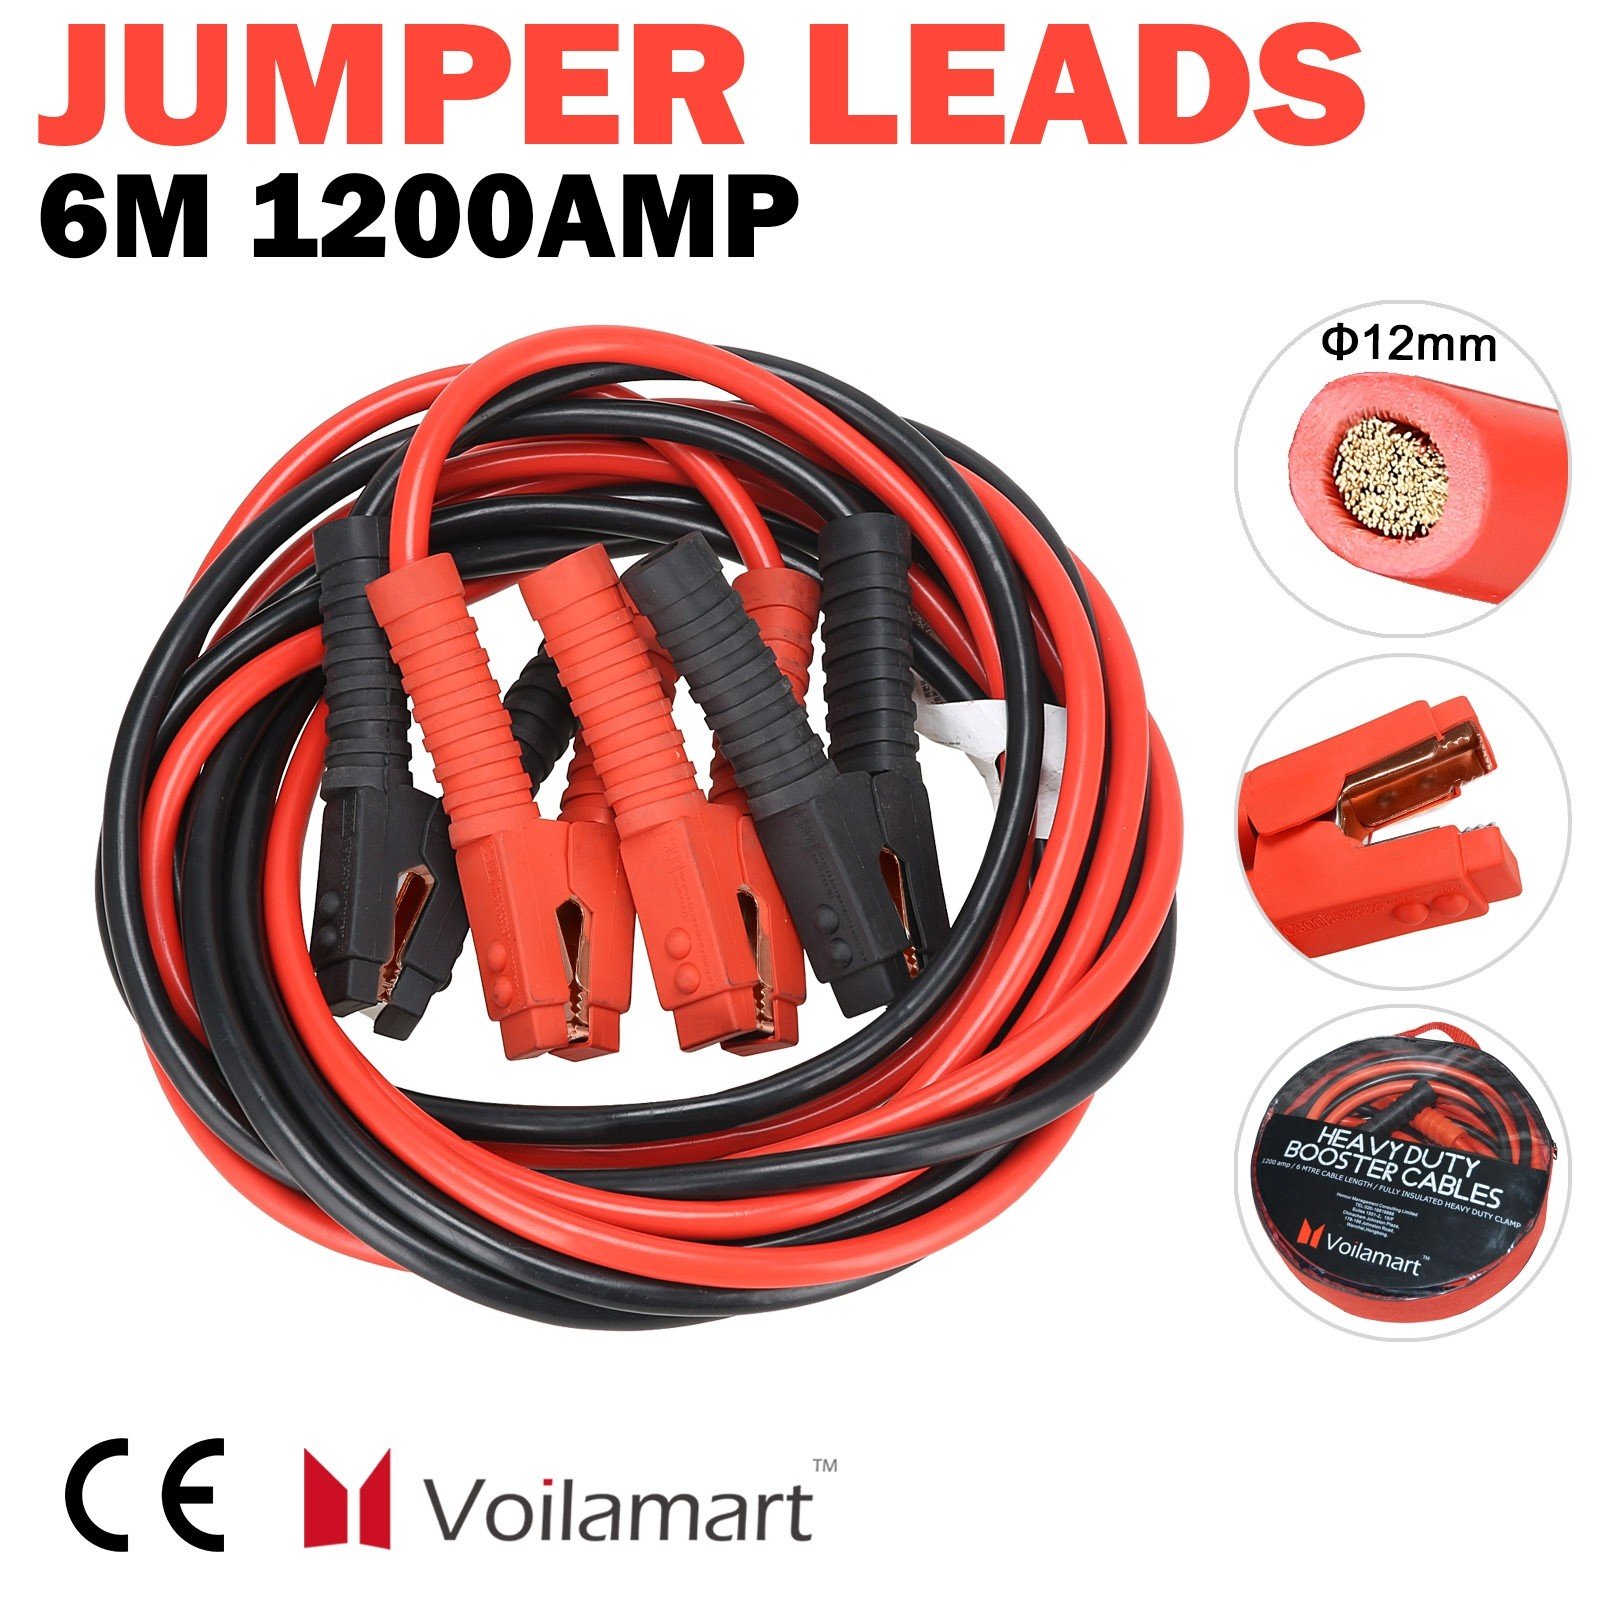 1200AMP Booster Cables 1 Gauge Jumper Leads Heavy Duty Car Van Clamps Start 20FT 